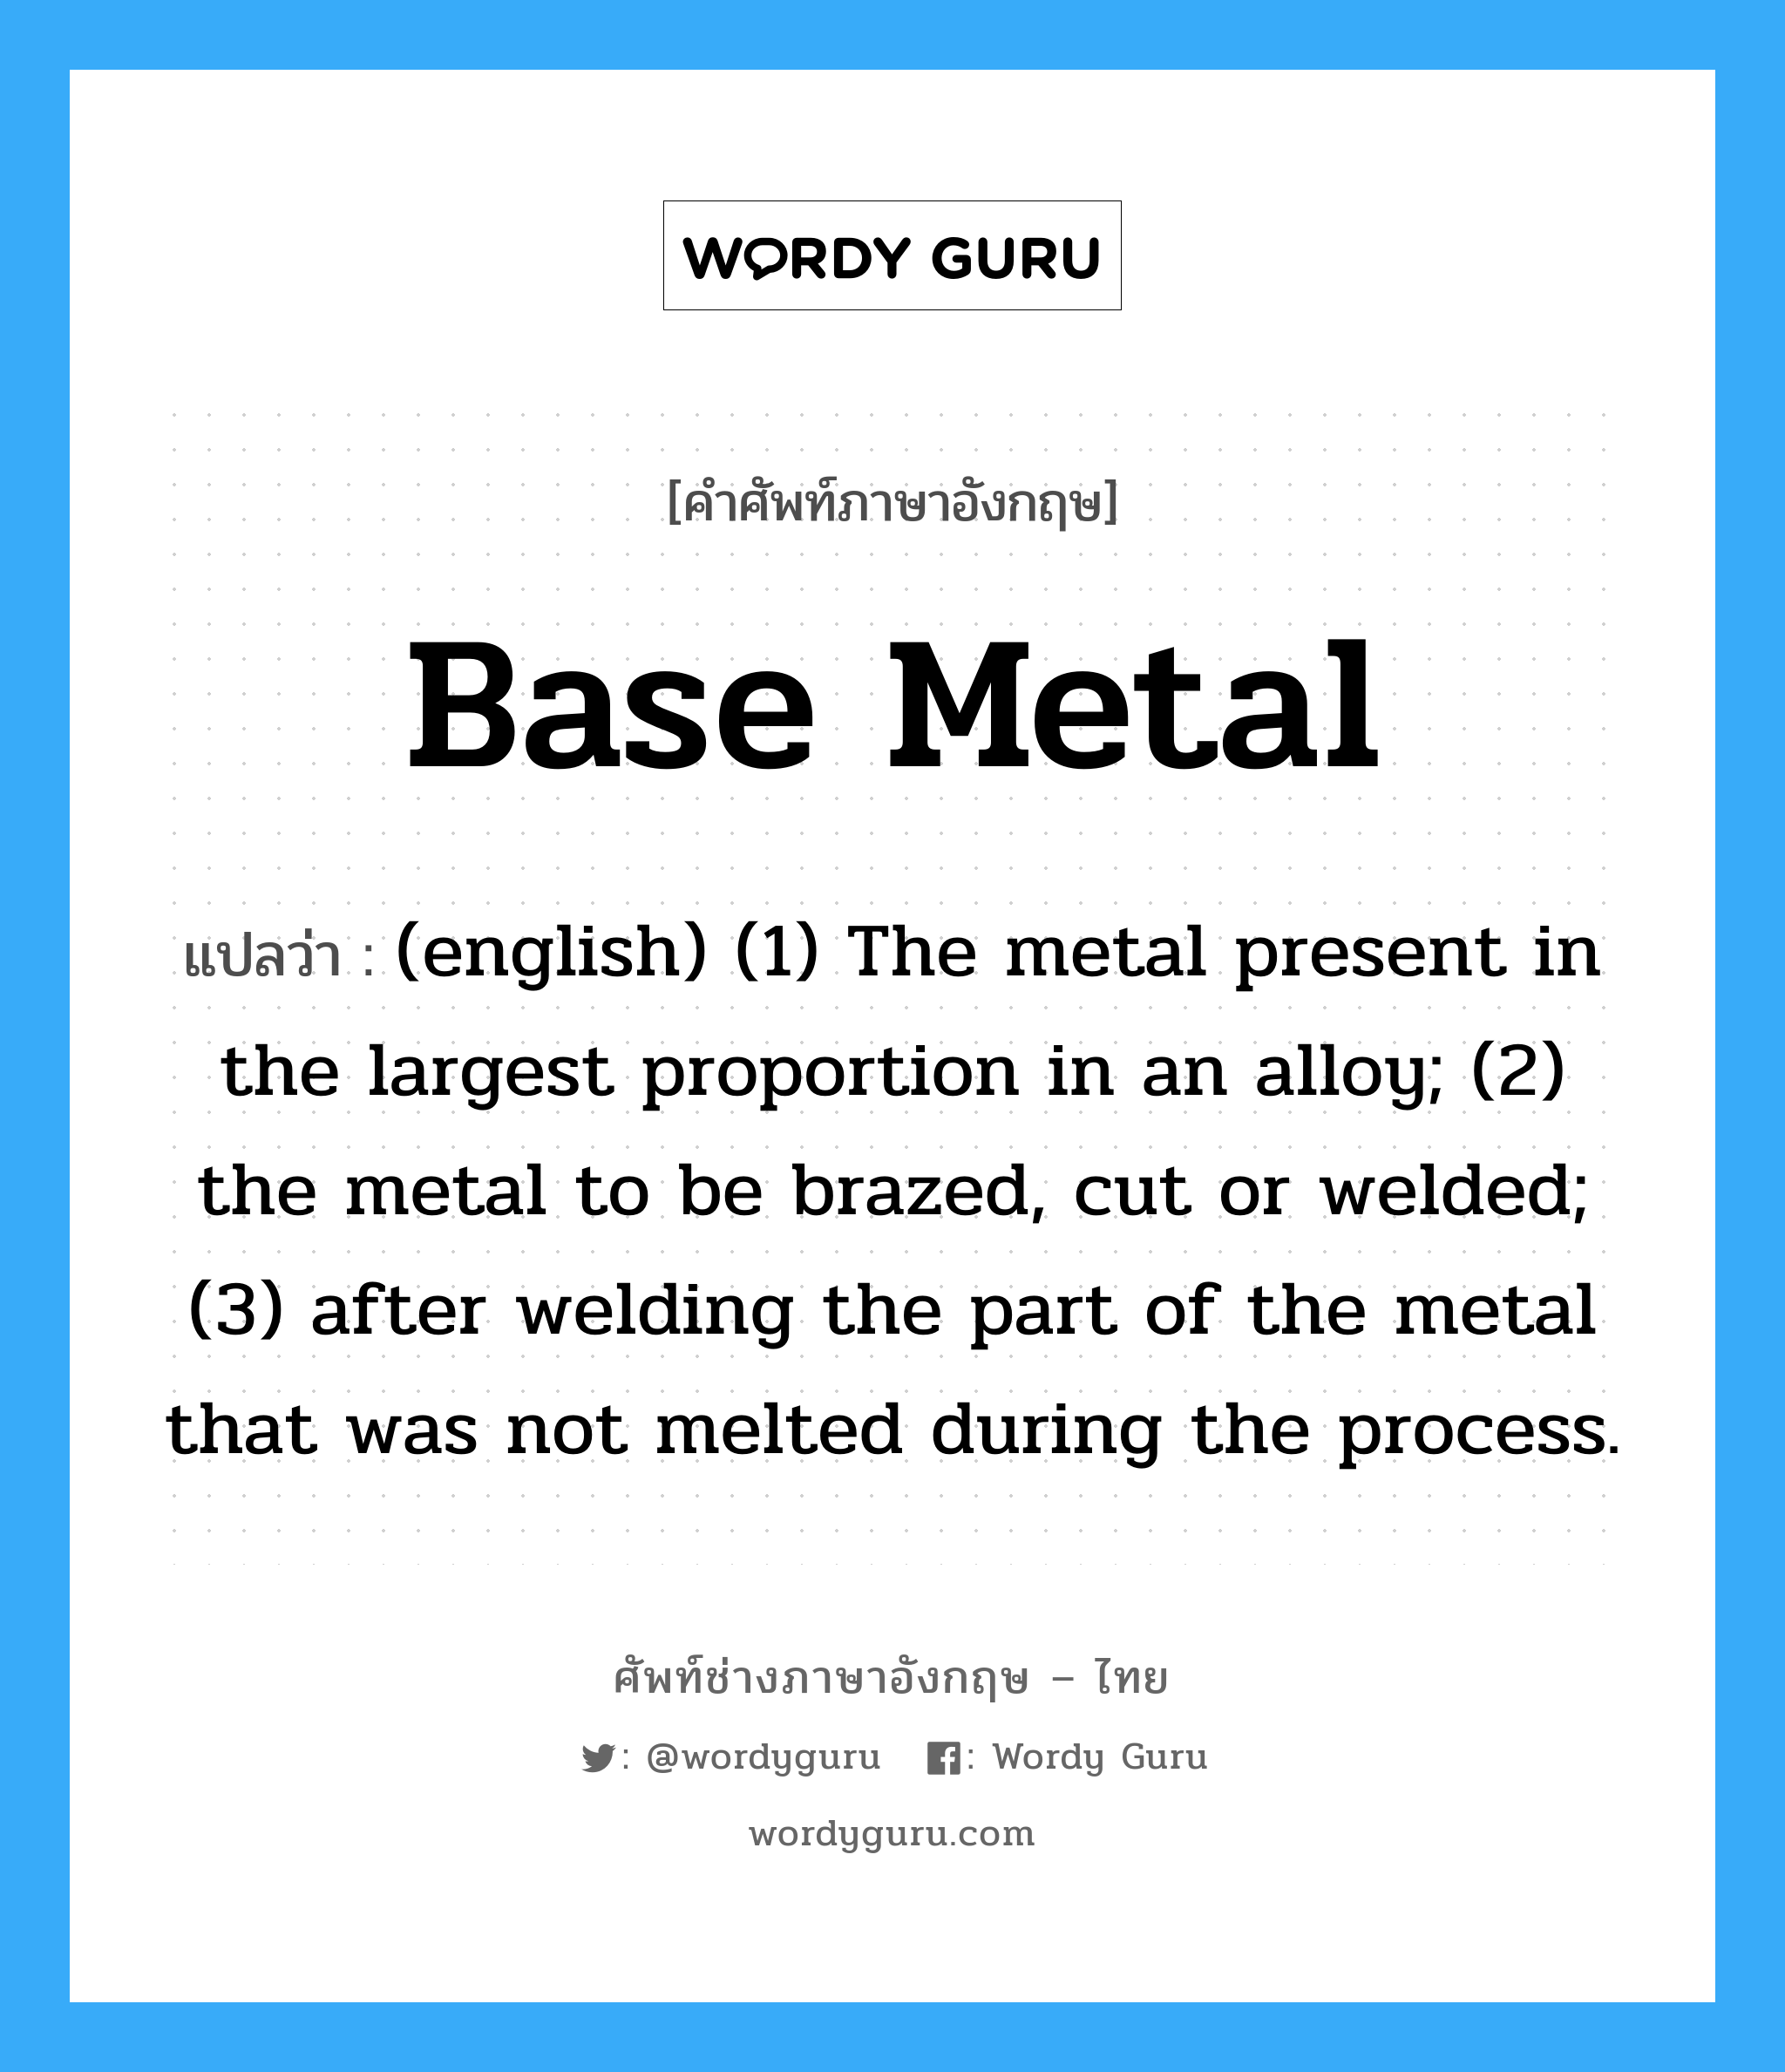 Base Metal แปลว่า?, คำศัพท์ช่างภาษาอังกฤษ - ไทย Base Metal คำศัพท์ภาษาอังกฤษ Base Metal แปลว่า (english) (1) The metal present in the largest proportion in an alloy; (2) the metal to be brazed, cut or welded; (3) after welding the part of the metal that was not melted during the process.